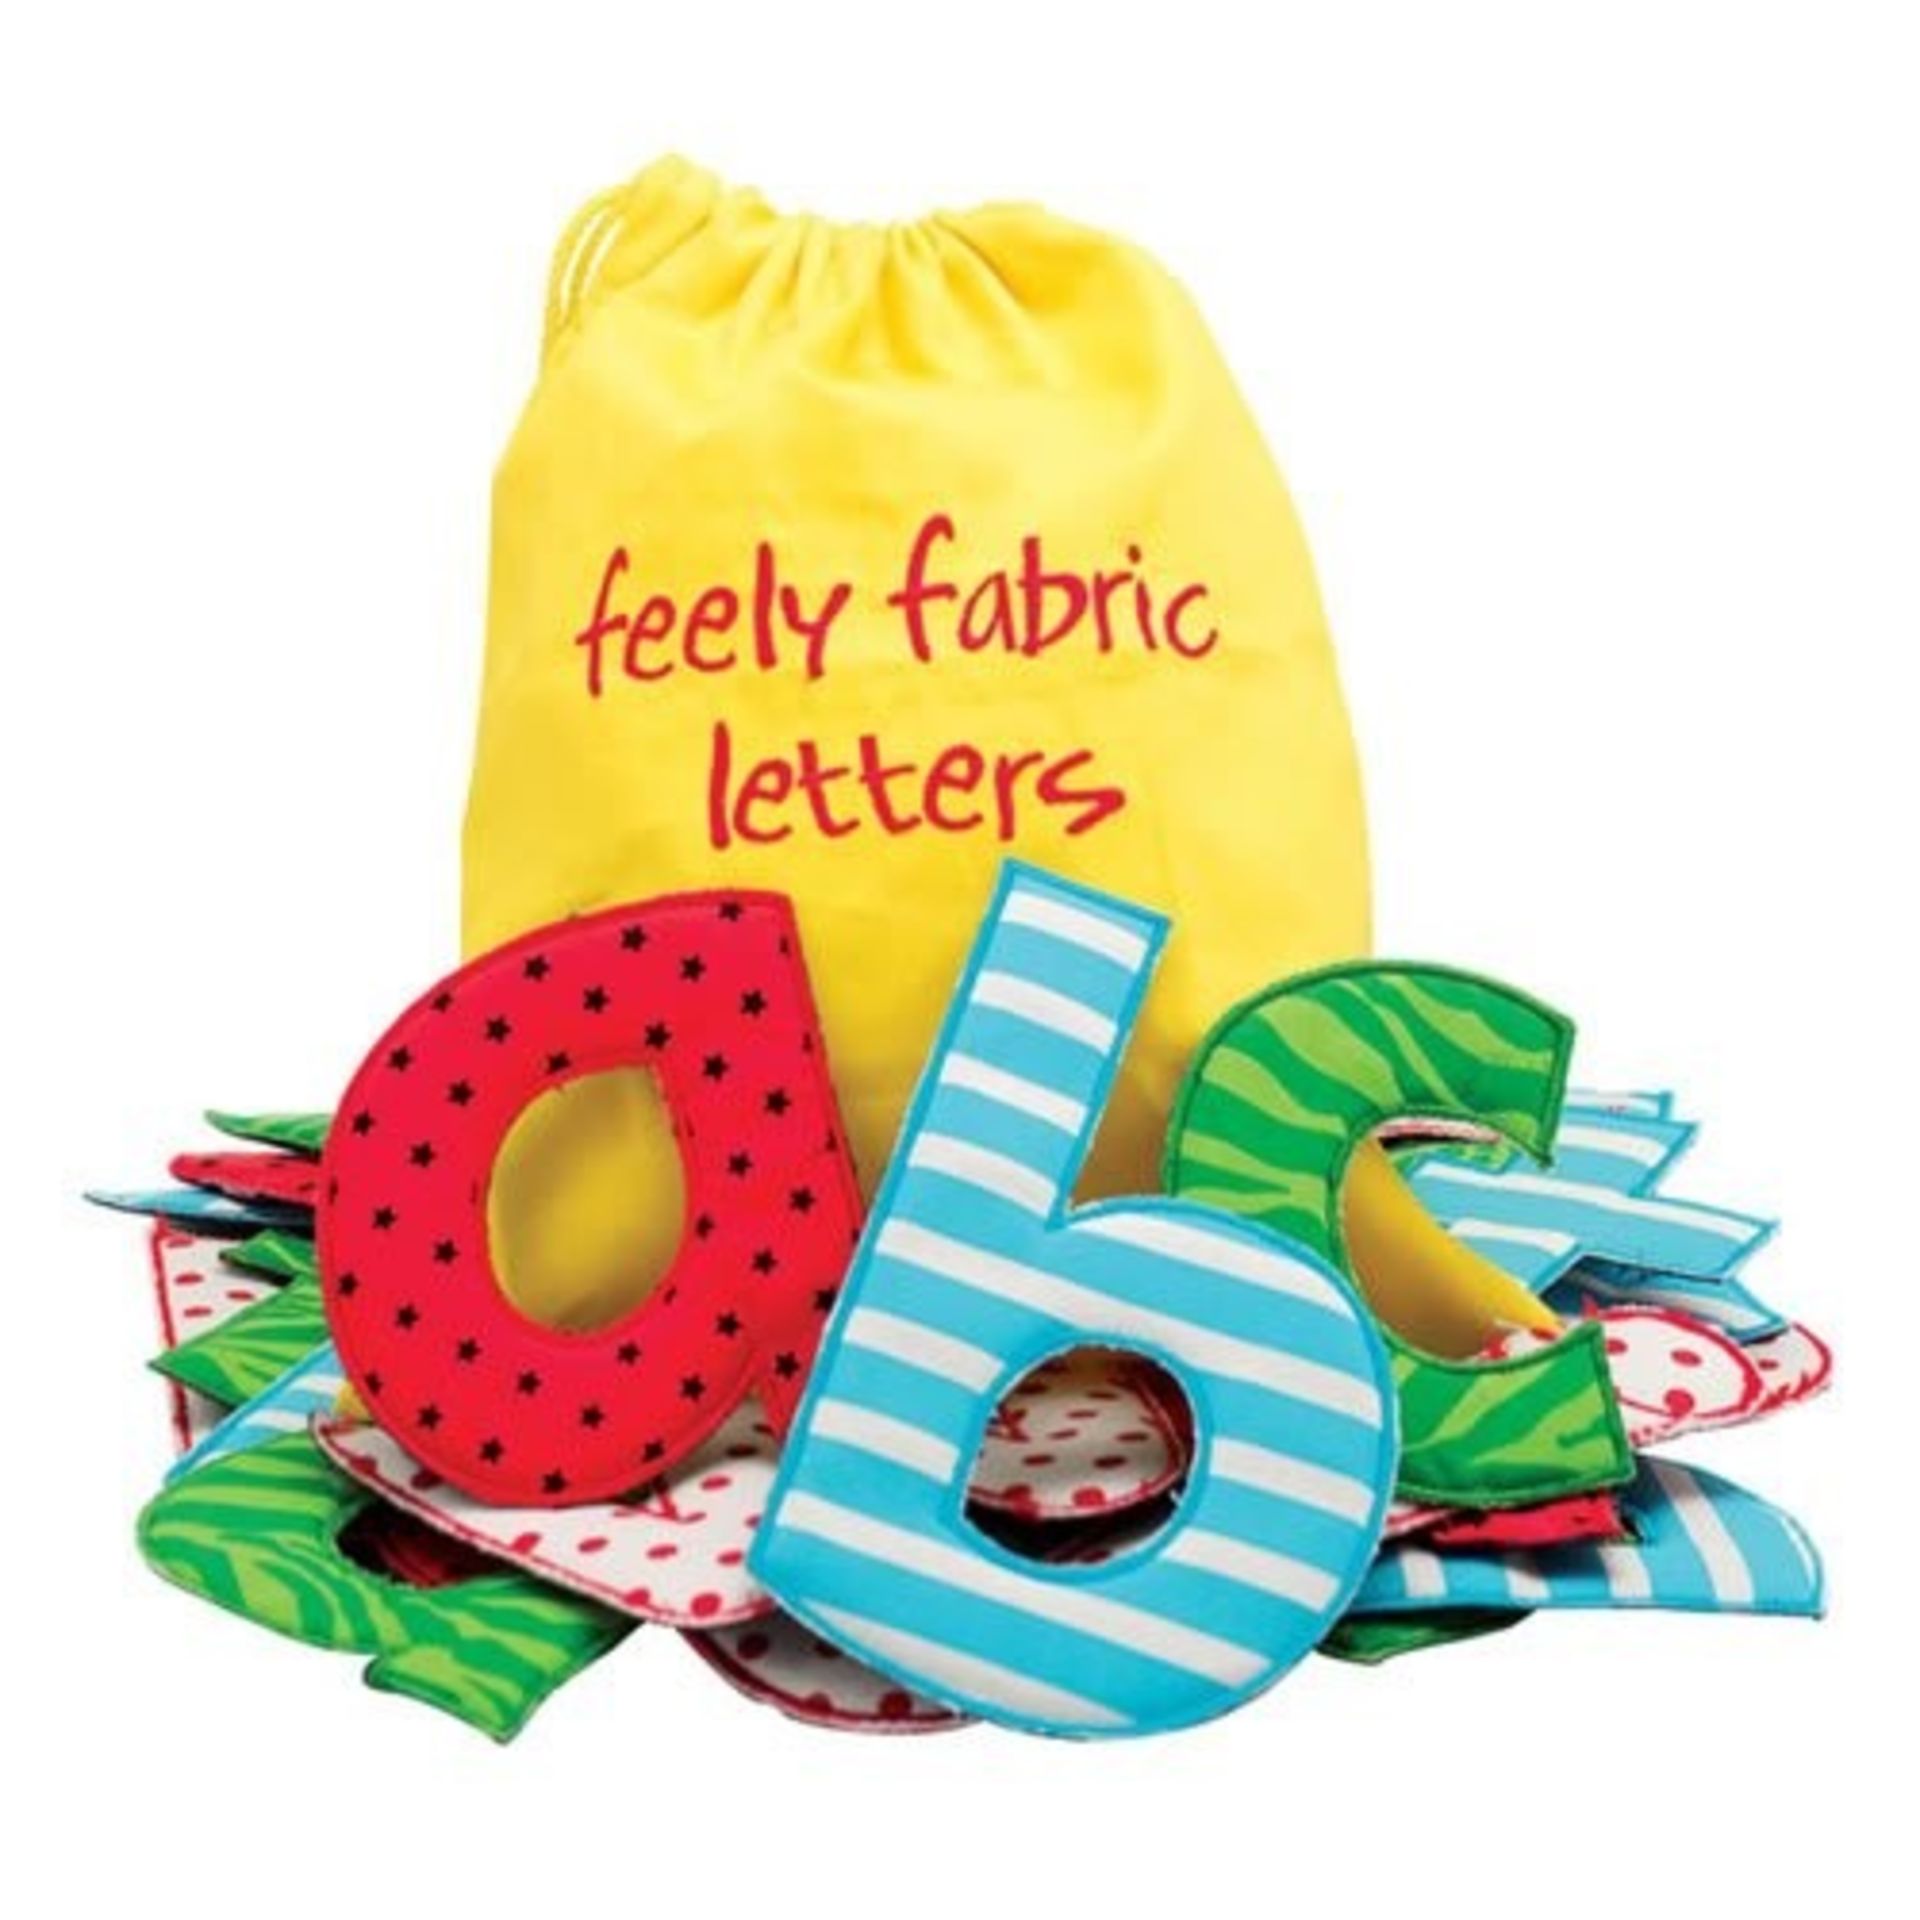 1 AS NEW BAGGED FEELY FABRIC LETTERS / RRP £31.05 (VIEWING HIGHLY RECOMMENDED)